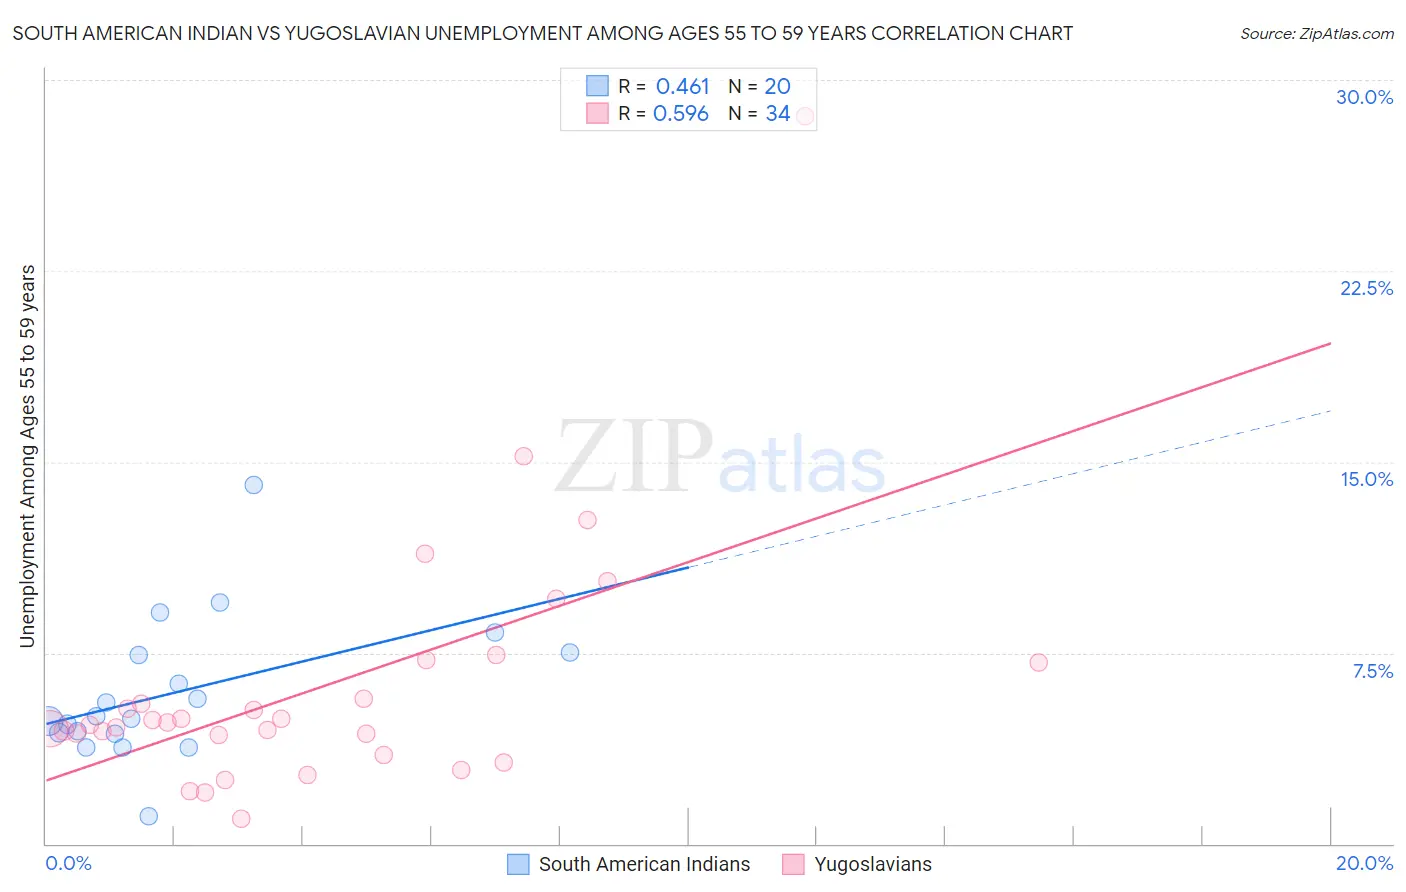 South American Indian vs Yugoslavian Unemployment Among Ages 55 to 59 years